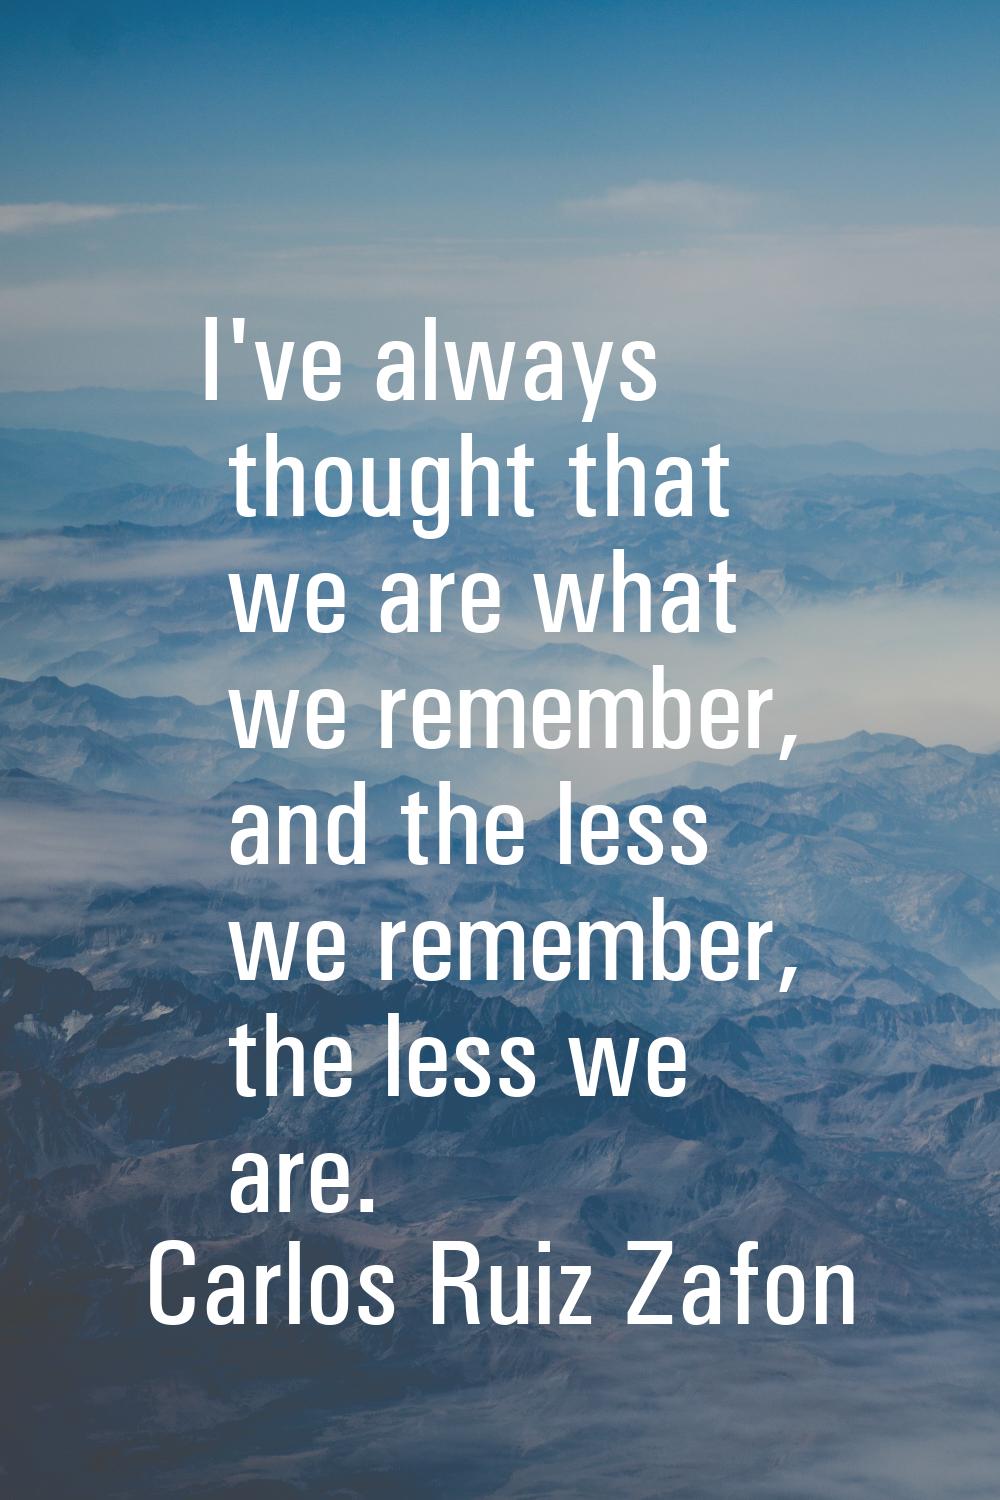 I've always thought that we are what we remember, and the less we remember, the less we are.